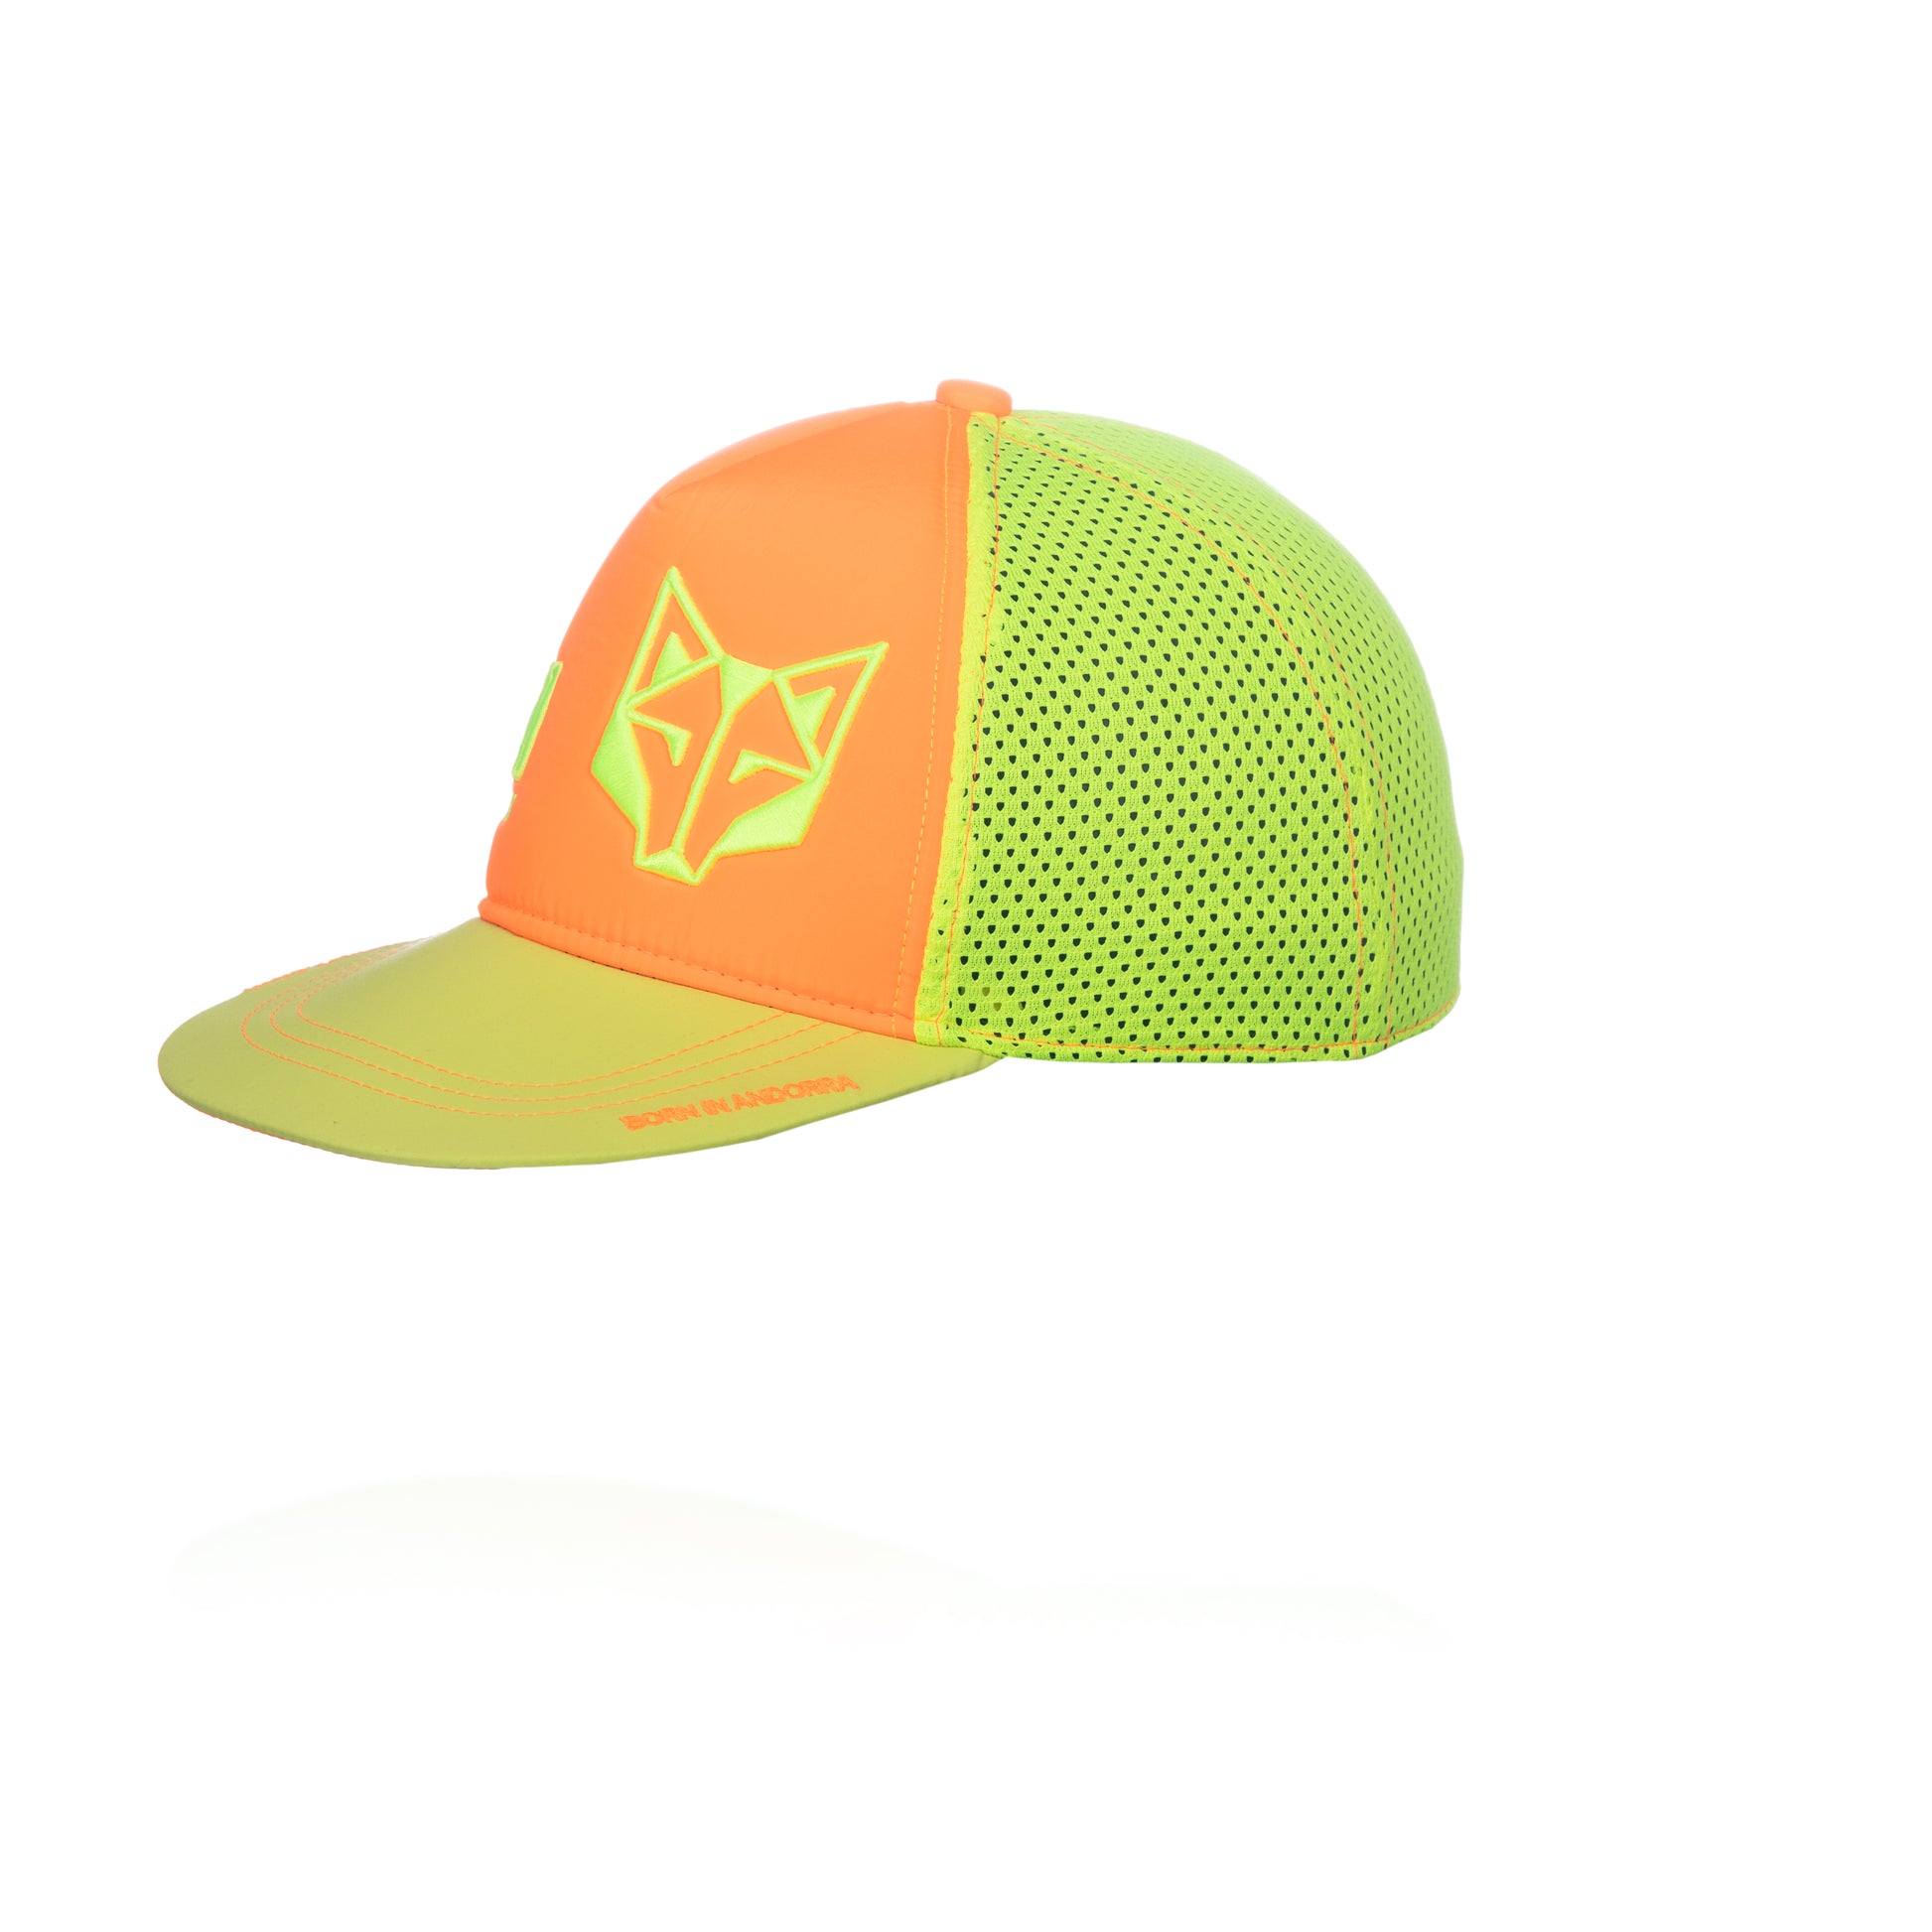 Casquette 6 pans fluo Safety - MB Goodies